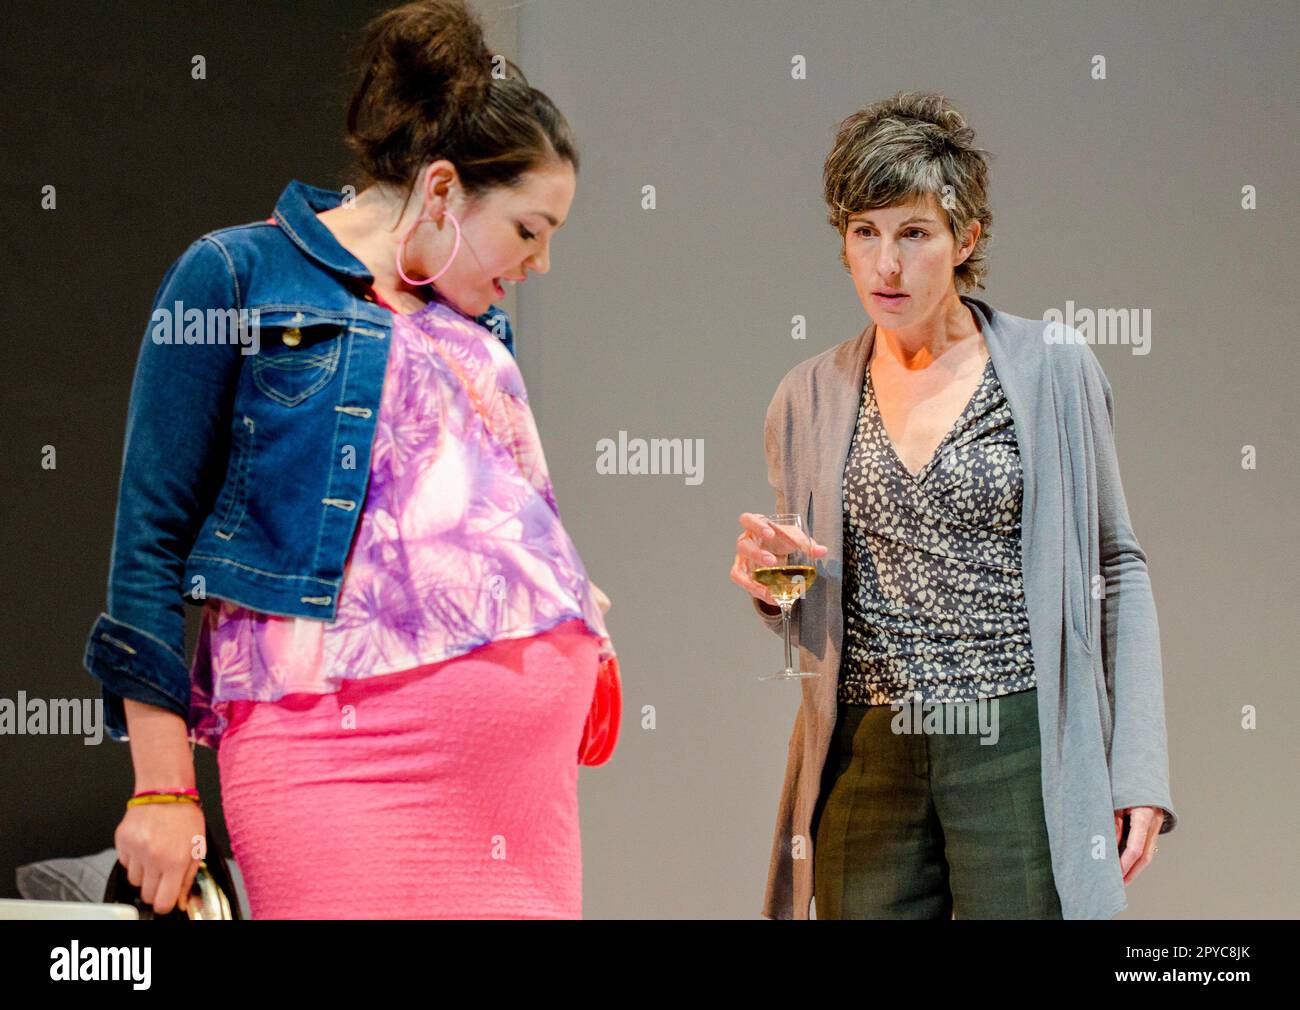 l-r: Seline Hizli (Lyndsey), Tamsin Greig (Hilary) in JUMPY by April de Angelis at the Jerwood Theatre Downstairs, Royal Court Theatre, London SW1  19/10/2011 design: Lizzie Clachan  lighting: Peter Mumford  director: Nina Raine Stock Photo